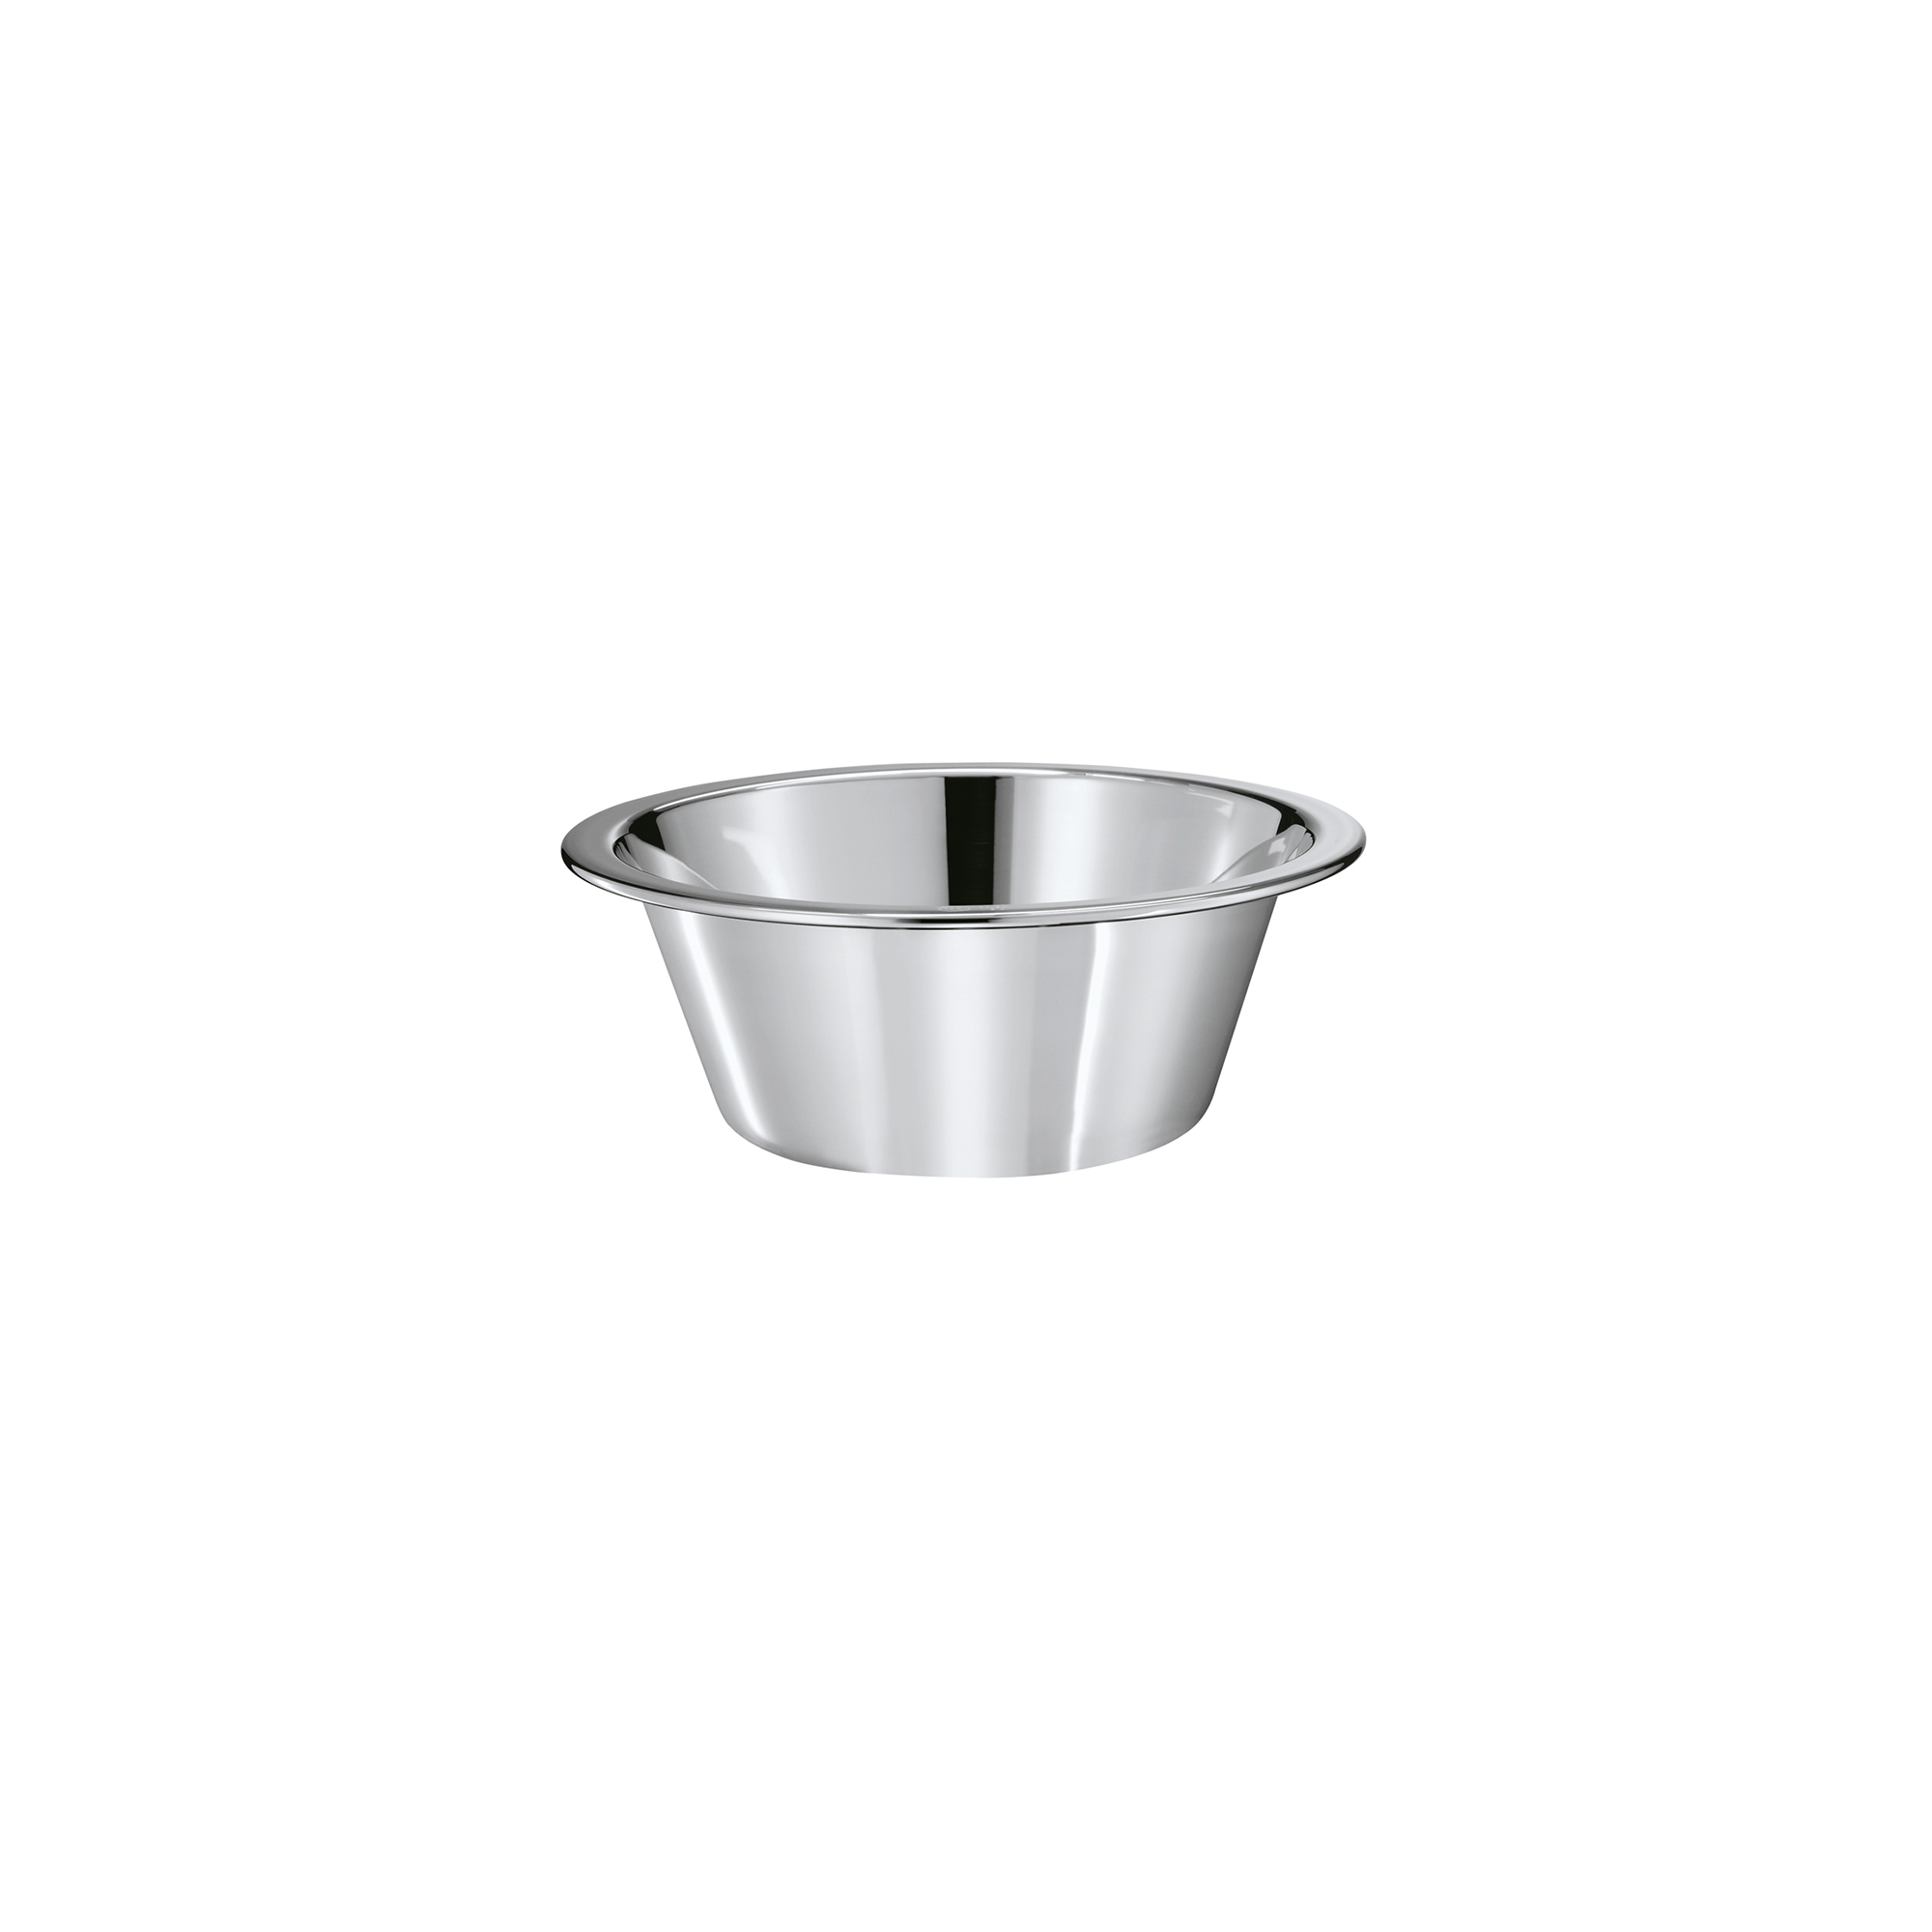 Conical Bowl Ø 16 cm|6.3 in.